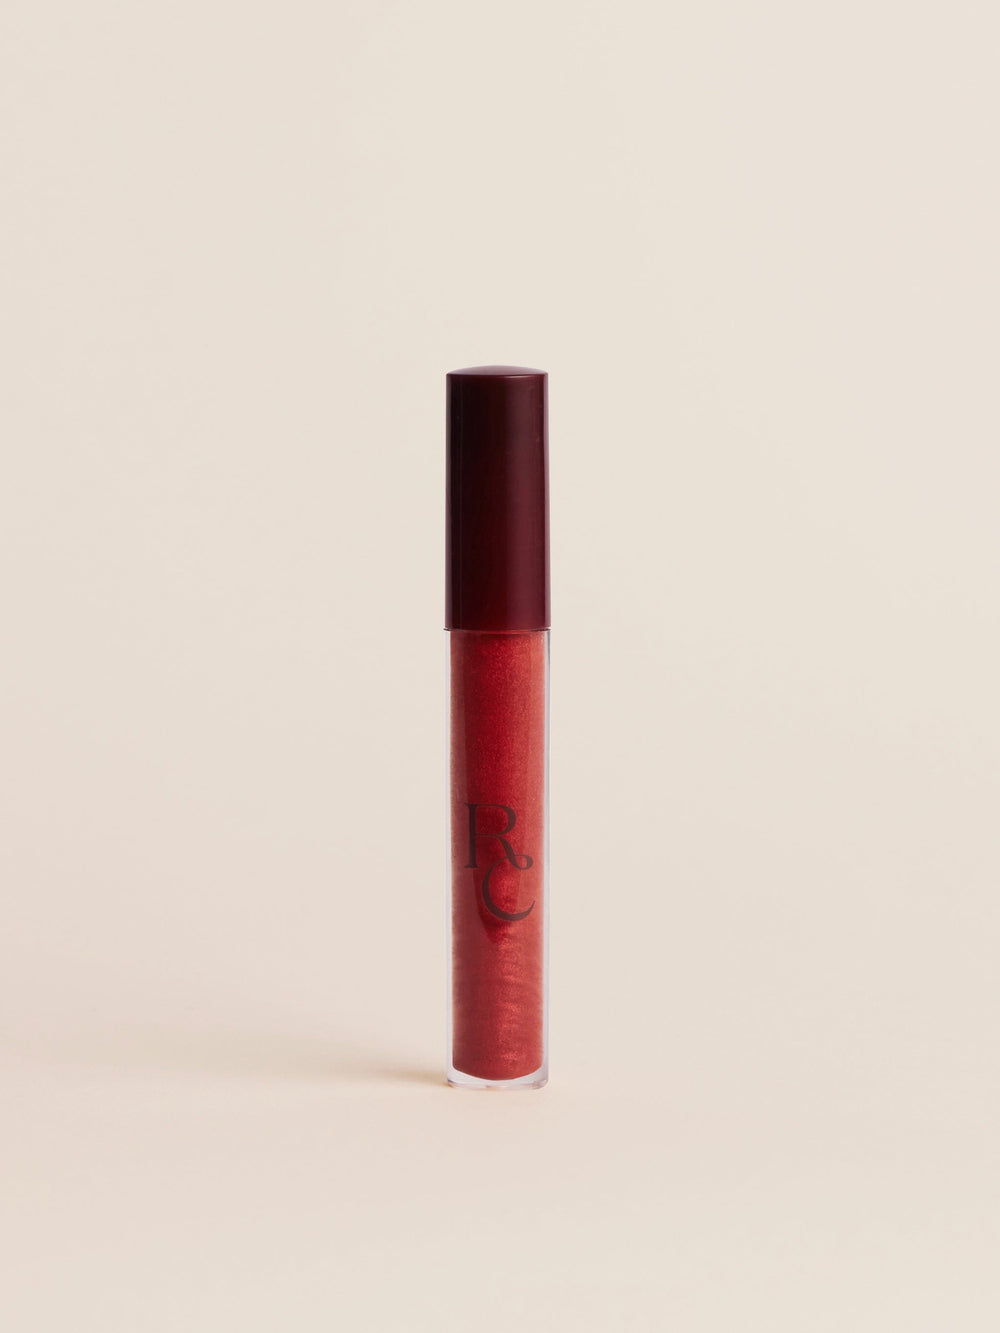 Rudolph Care - Lips By Rudolph Care - Andrea (02)Andrea (02) Lipgloss 